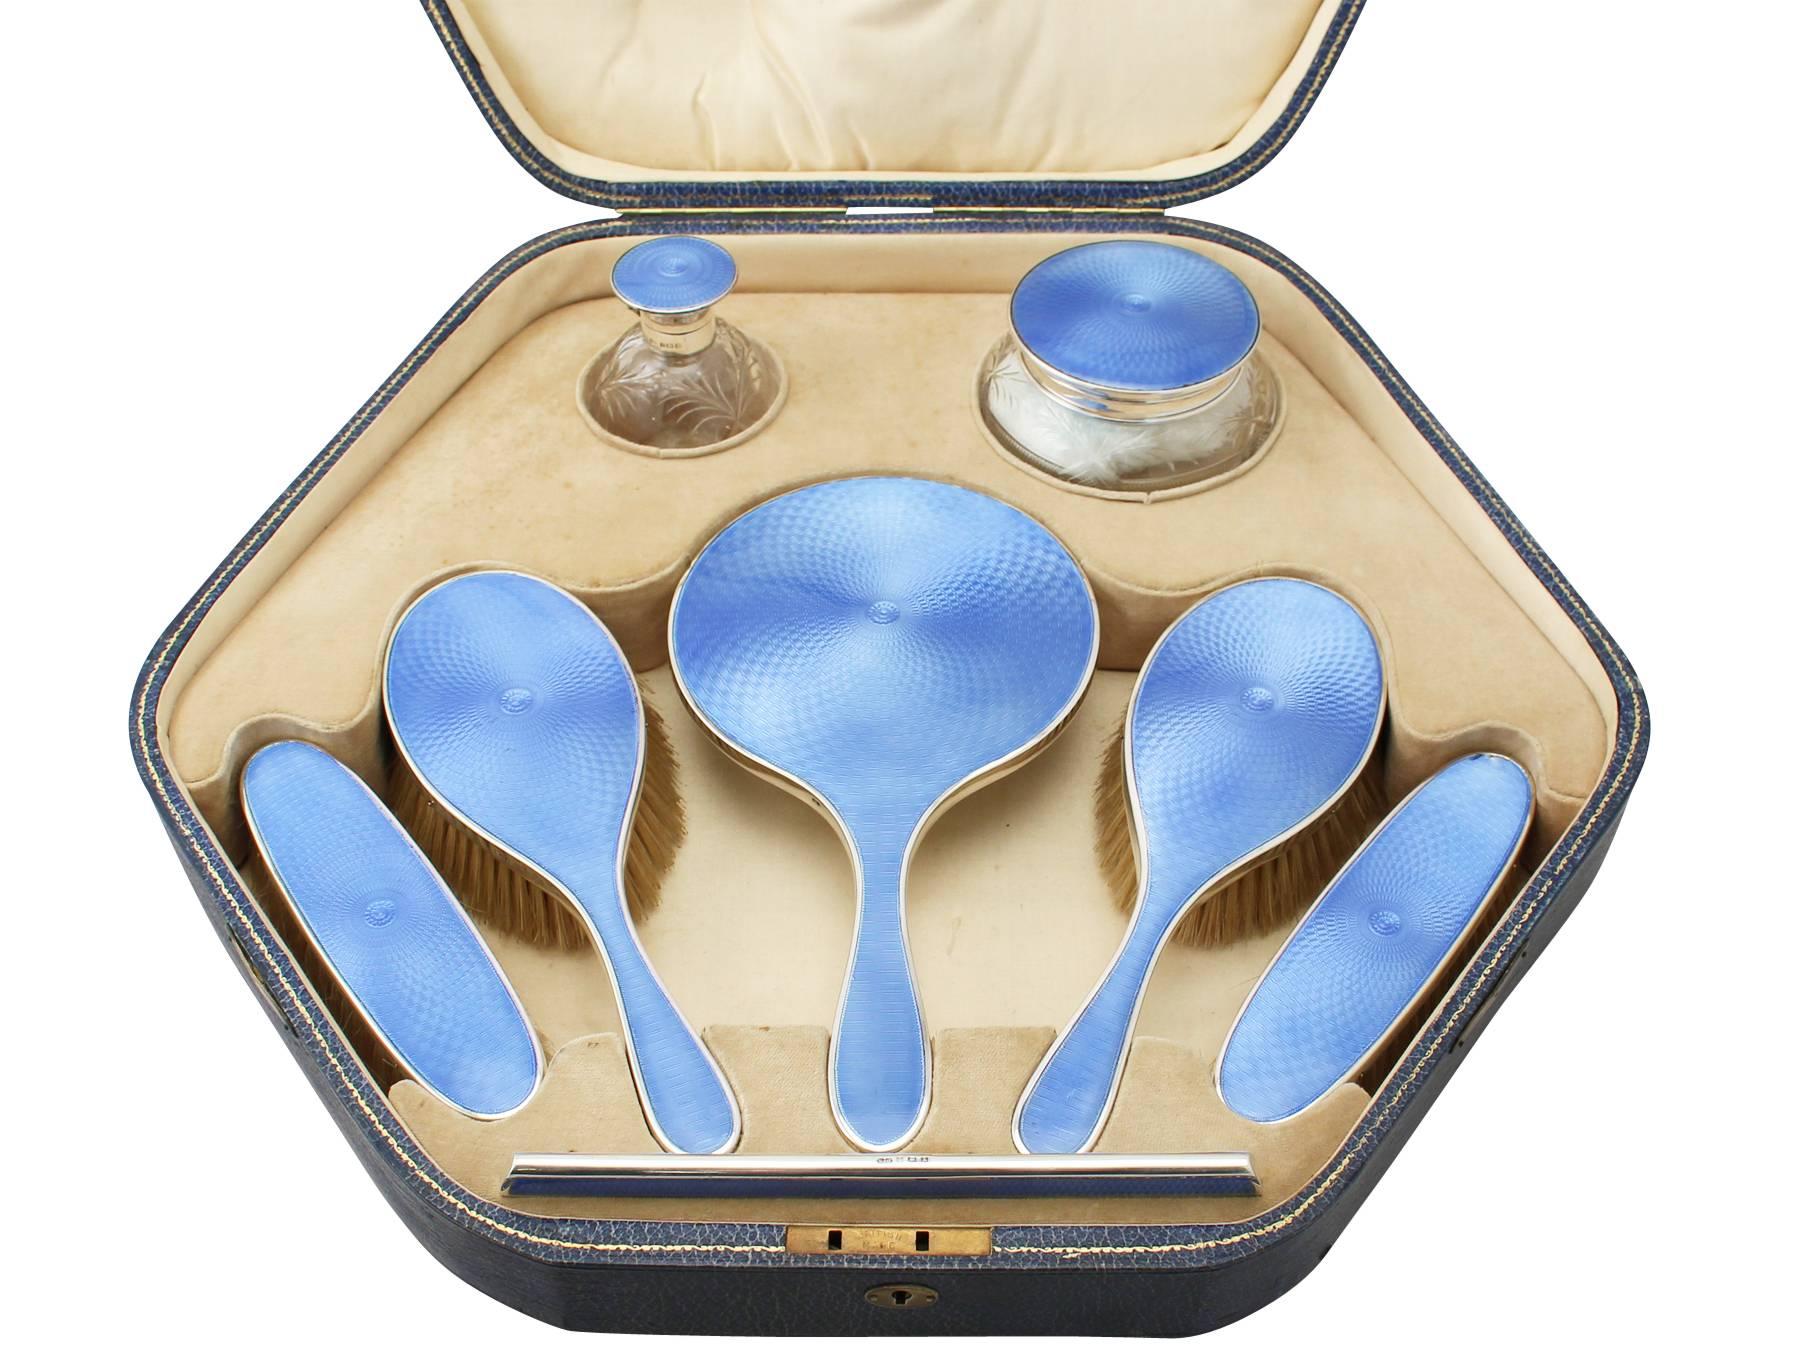 A fine, impressive and comprehensive antique George V English cut glass, sterling silver and guilloche enamel eight piece dressing table set - boxed; part of our silverware collection.

This impressive antique George V cut glass, sterling silver and